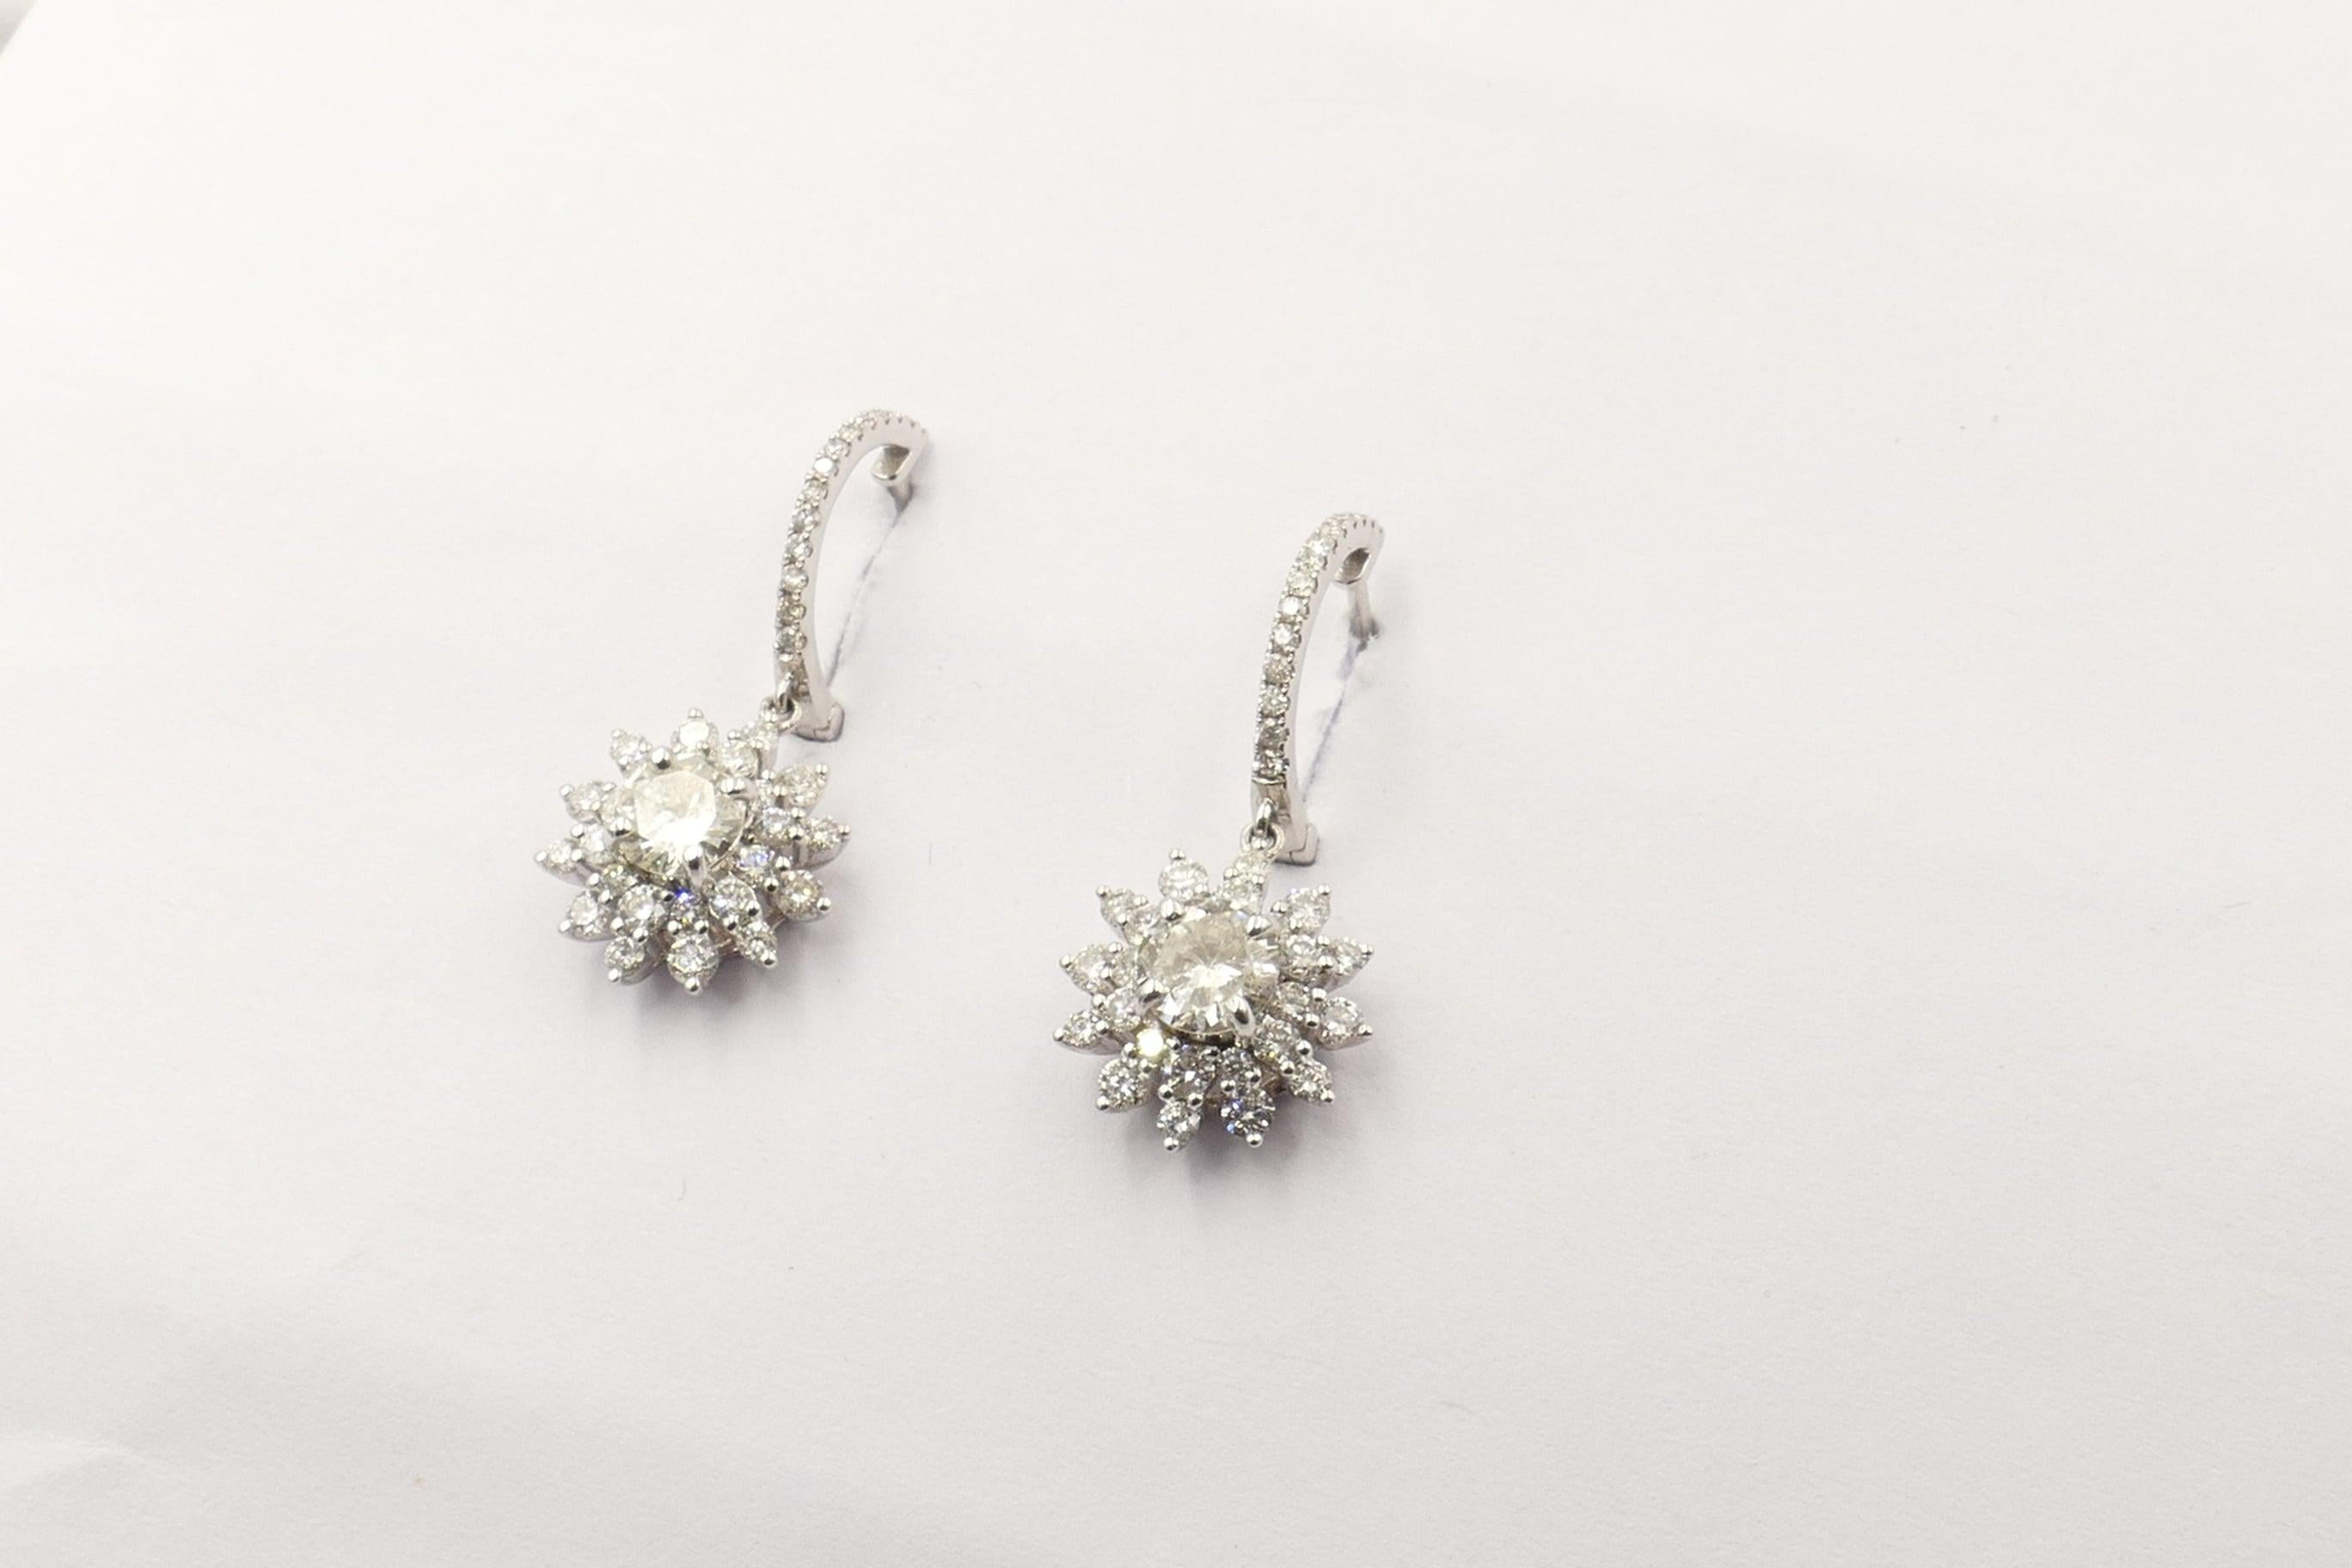 2 Round Brilliant Cut Diamonds, ColourF/G, Clarity SI1-SI2, individually 4 claw set, are surrounded by 76 Round Brilliant Cut Diamonds, Colour G/h, Clarity SI1-SI2 & micro-claw set in these very sparkly very wearable brand new Earrings.
The Earrings